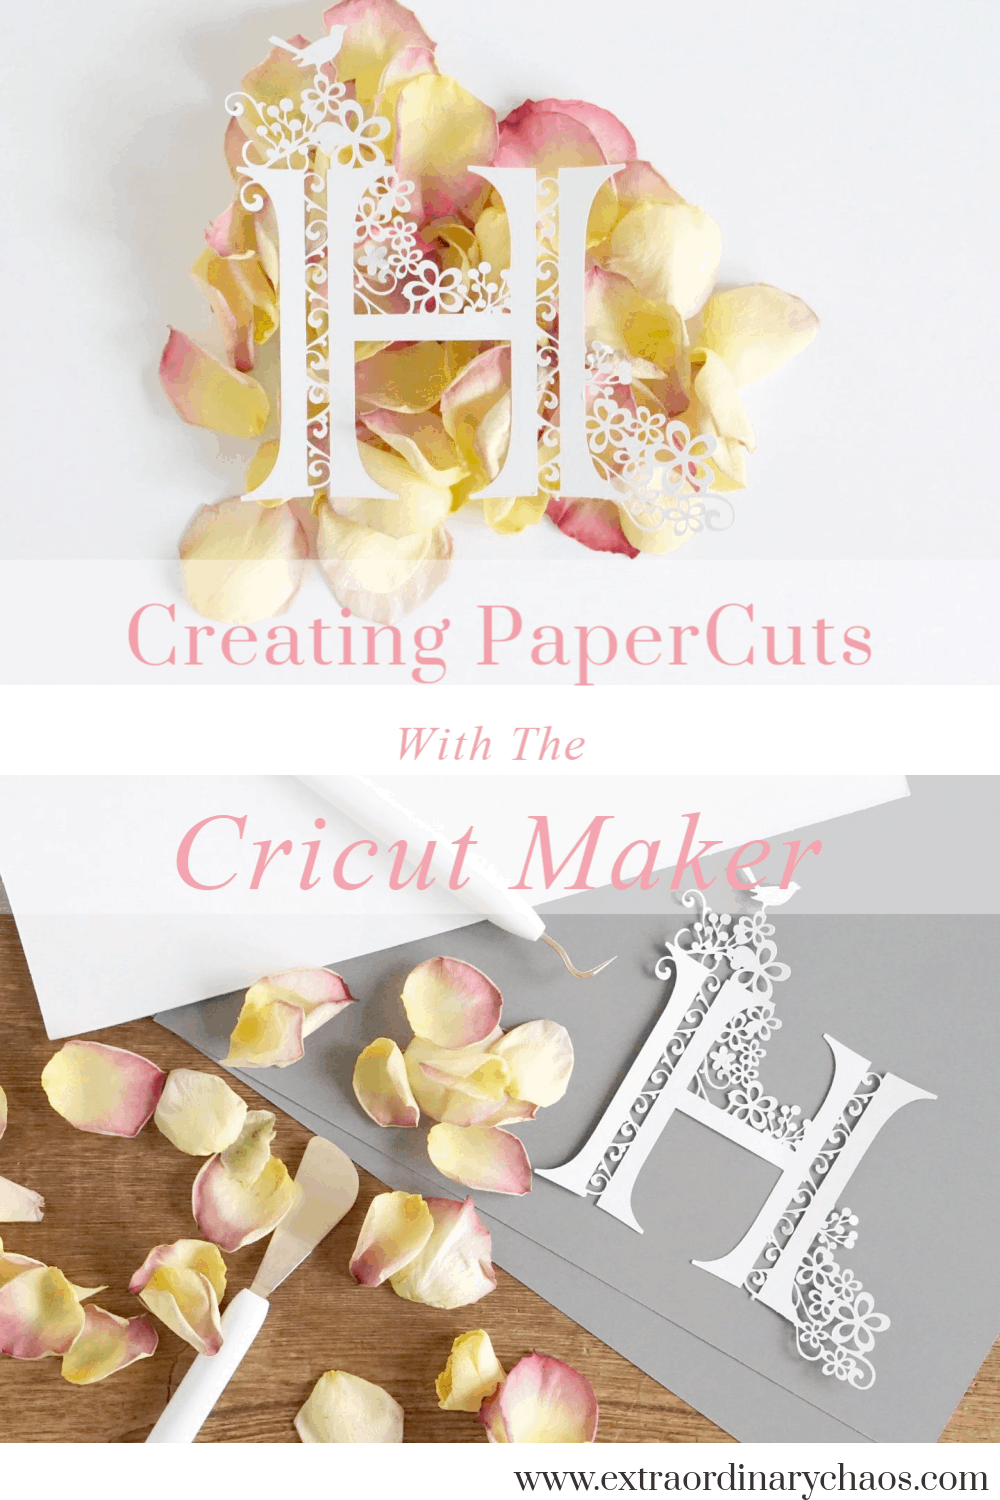 Cricut Maker Projects To Sell, Monogram Paper cut ideas for gifts. #cricutmaker #cricutpapercuts #giftstosell